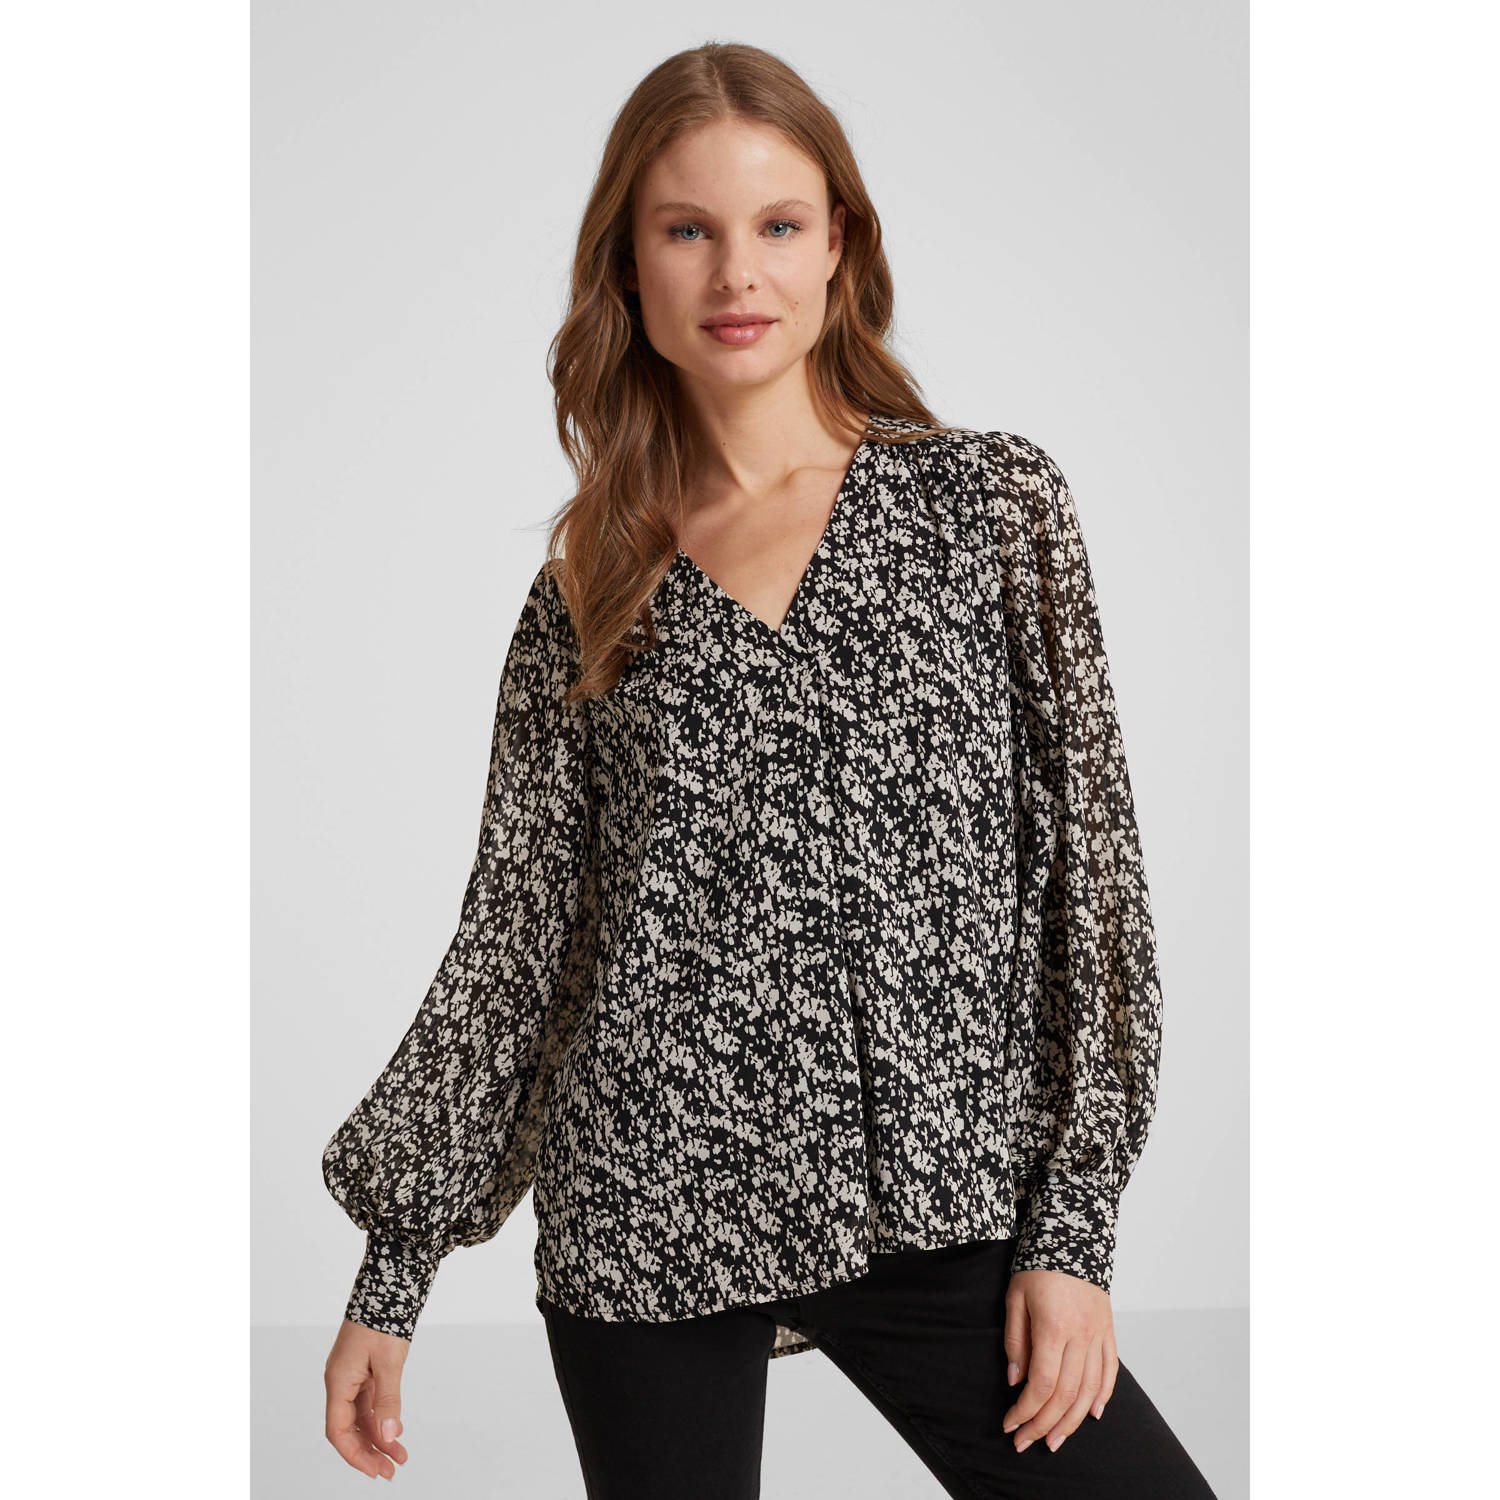 anytime geweven blouse met all over print